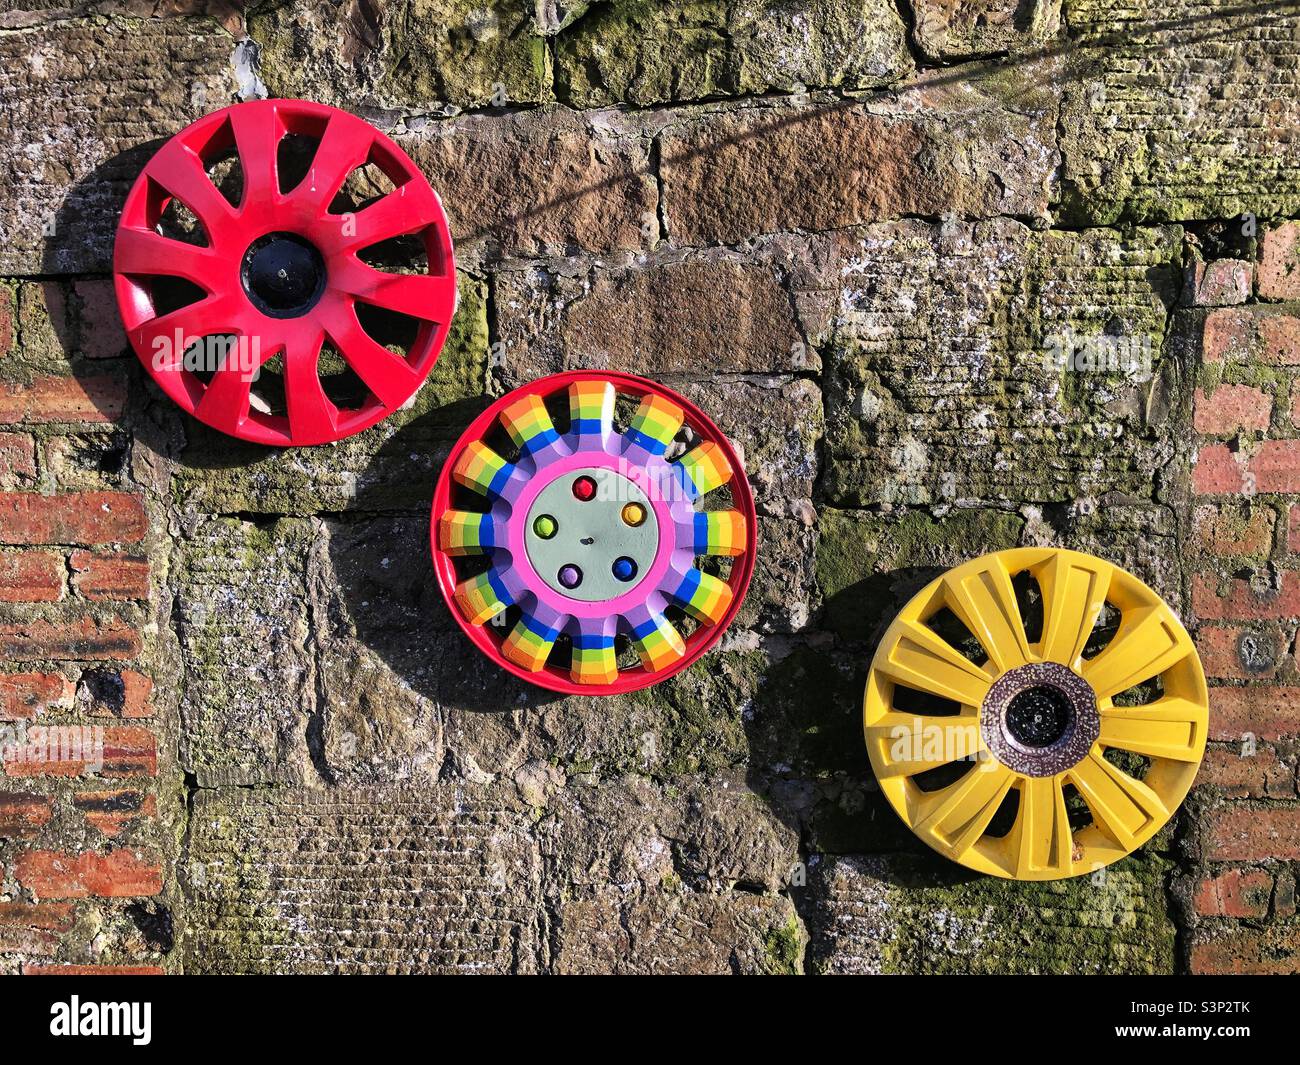 Painted car hubcaps in an outdoor childrens garden Stock Photo